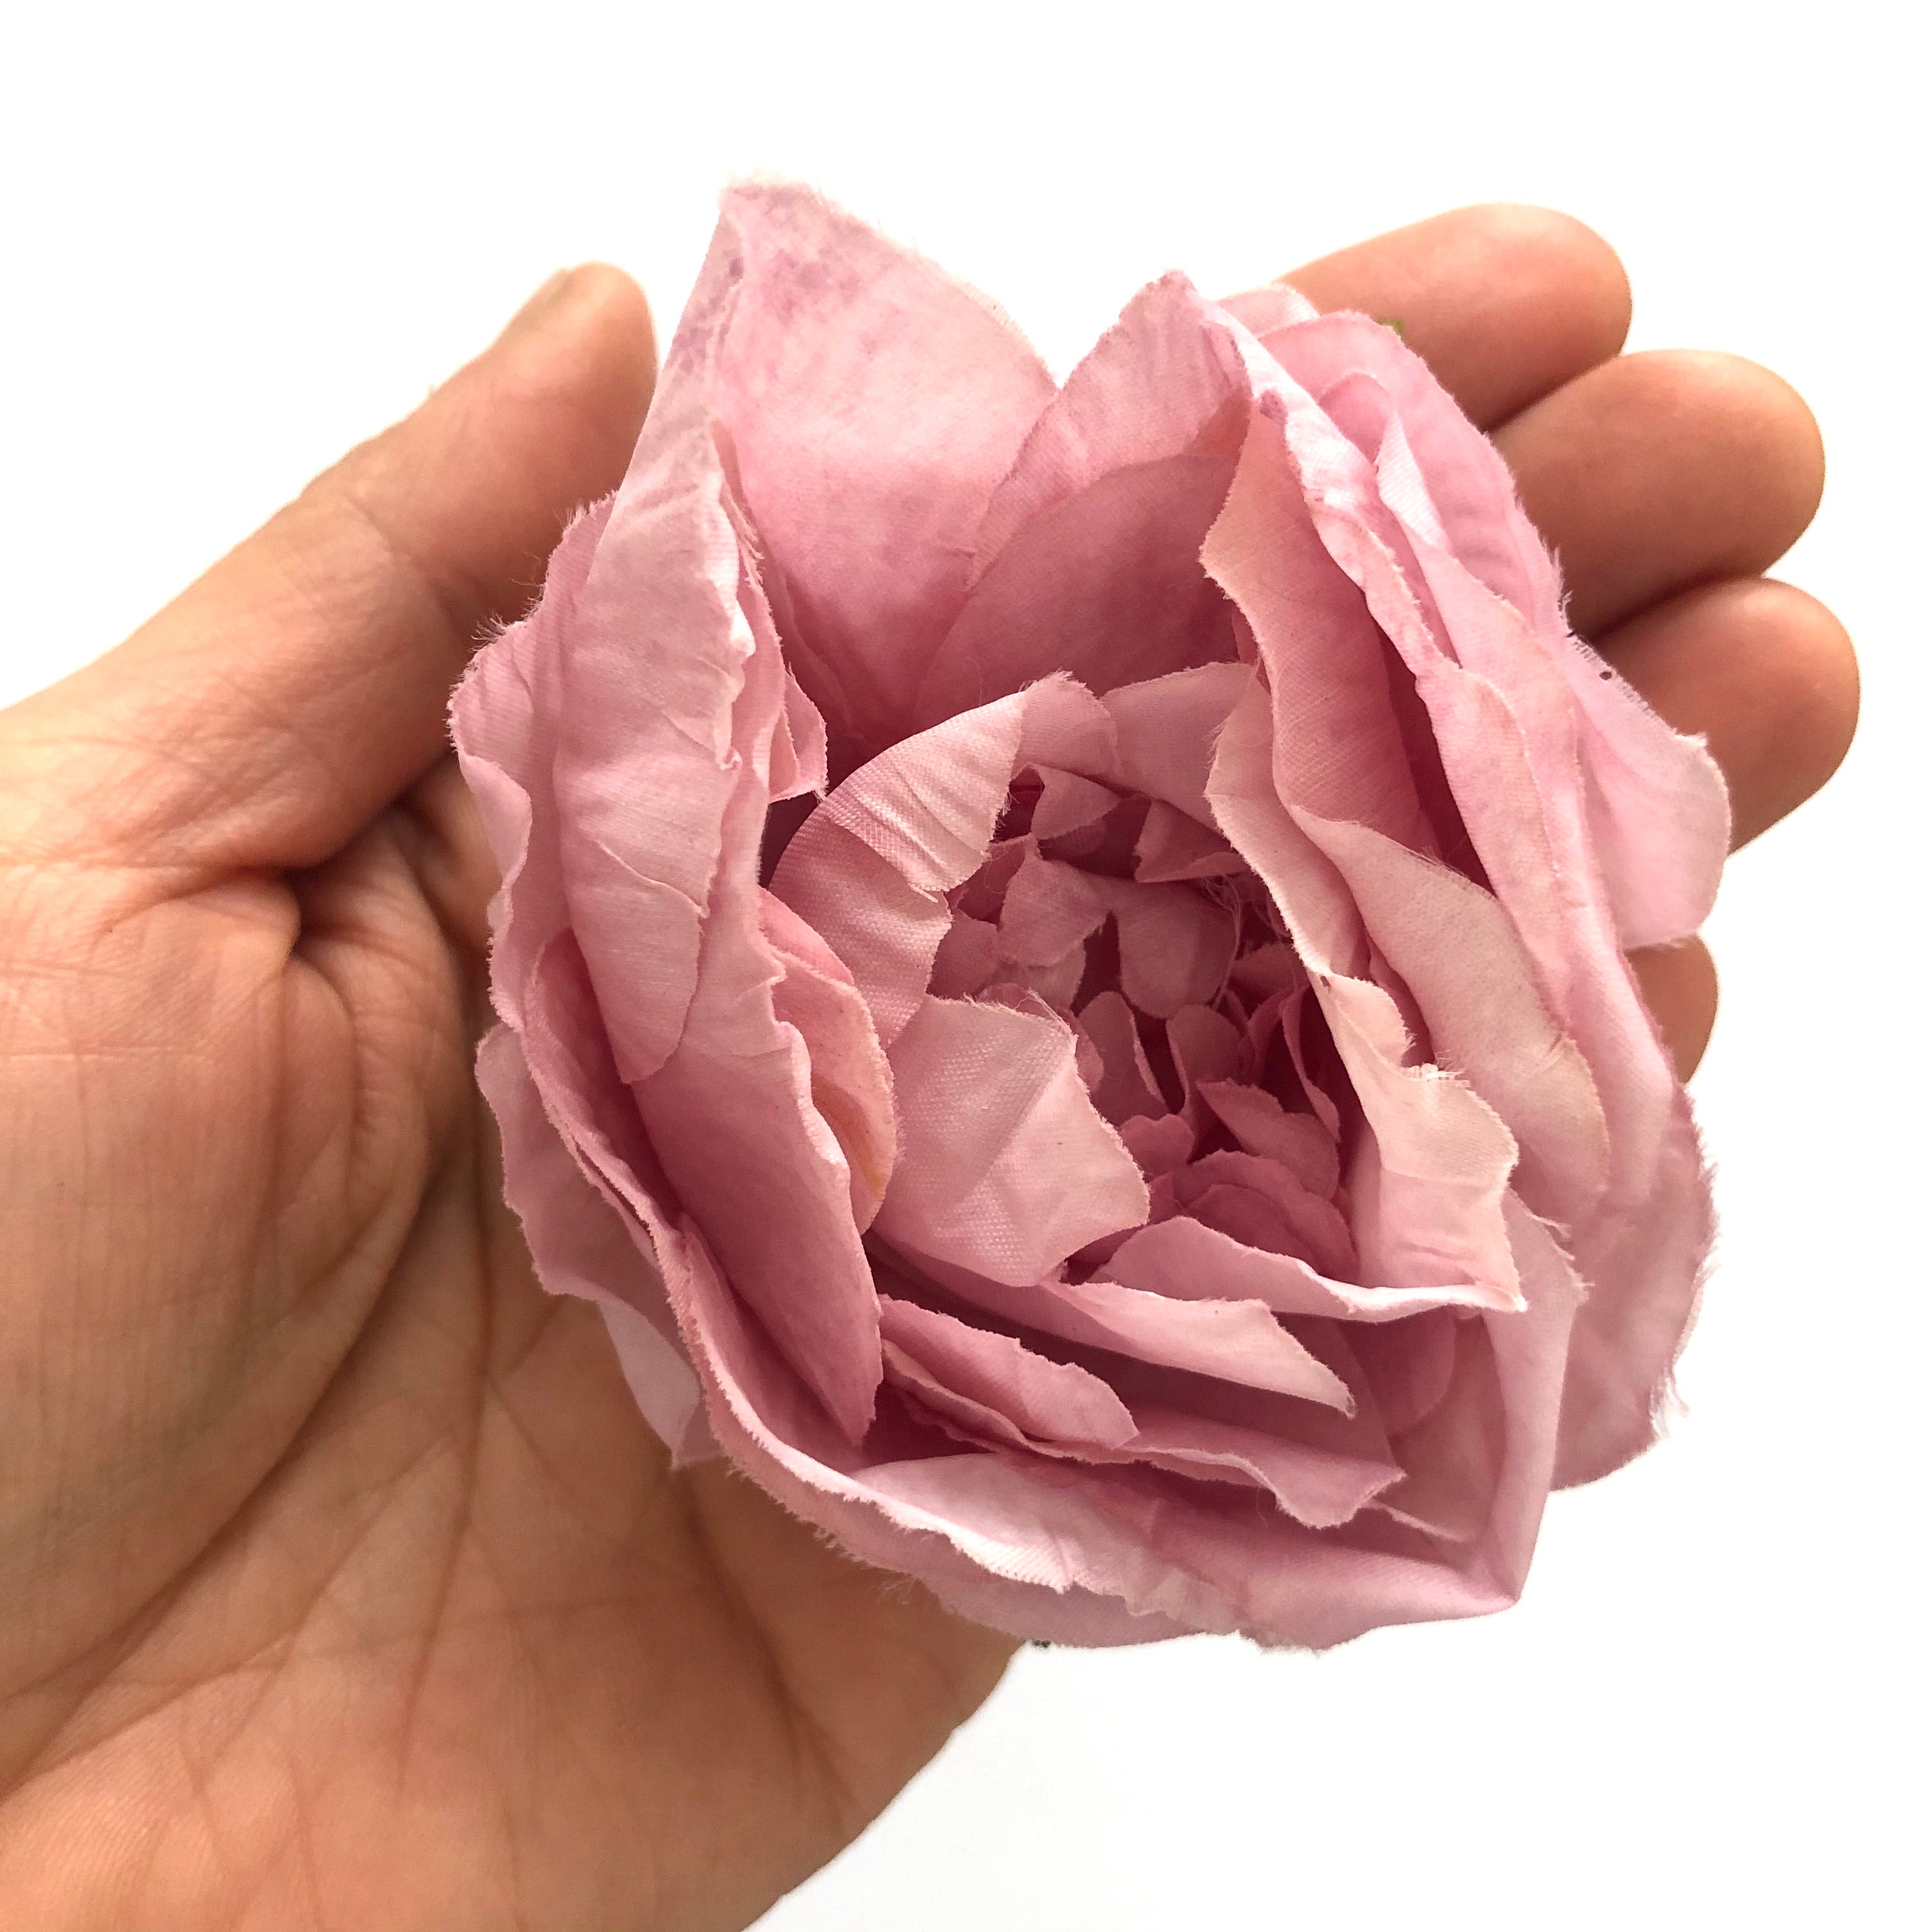 Artificial Silk Flower Head - Pink Rose Style 3 - 1pc